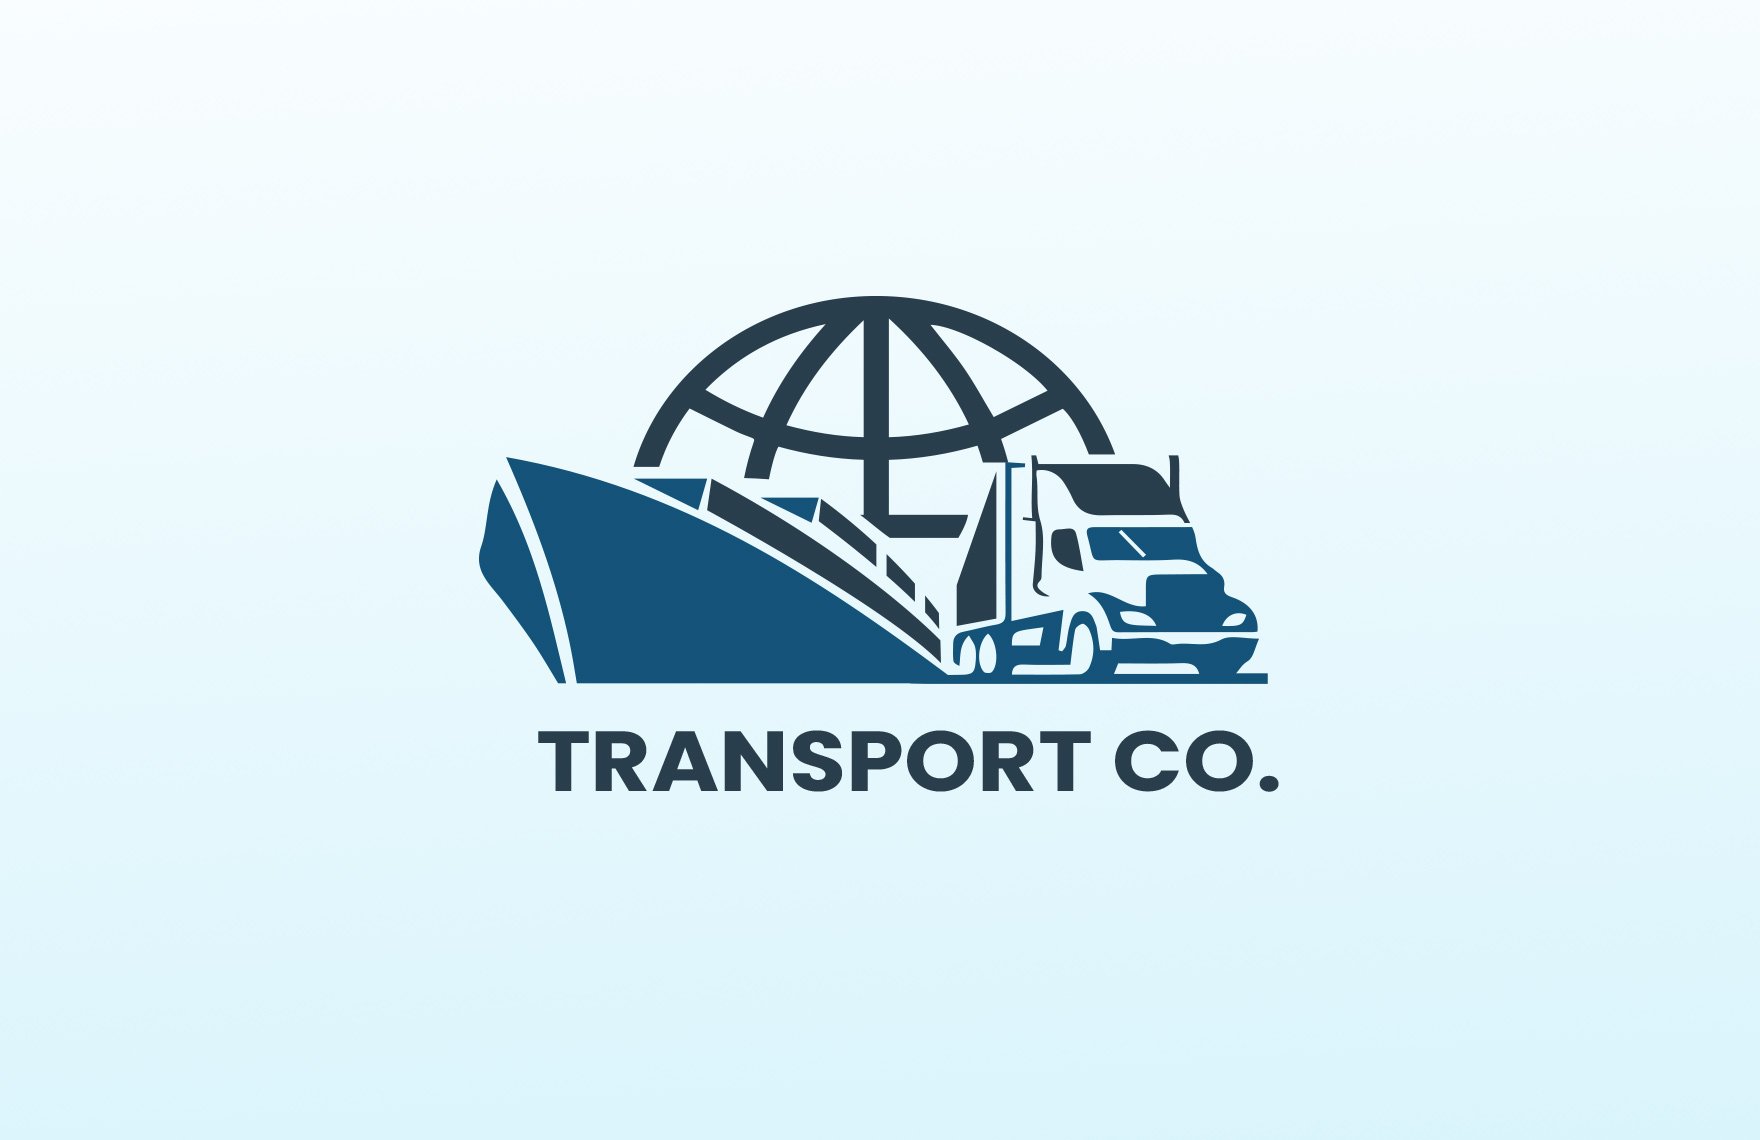 Transport and Logistics Freight Forwarding Logo with Truck Symbol Template